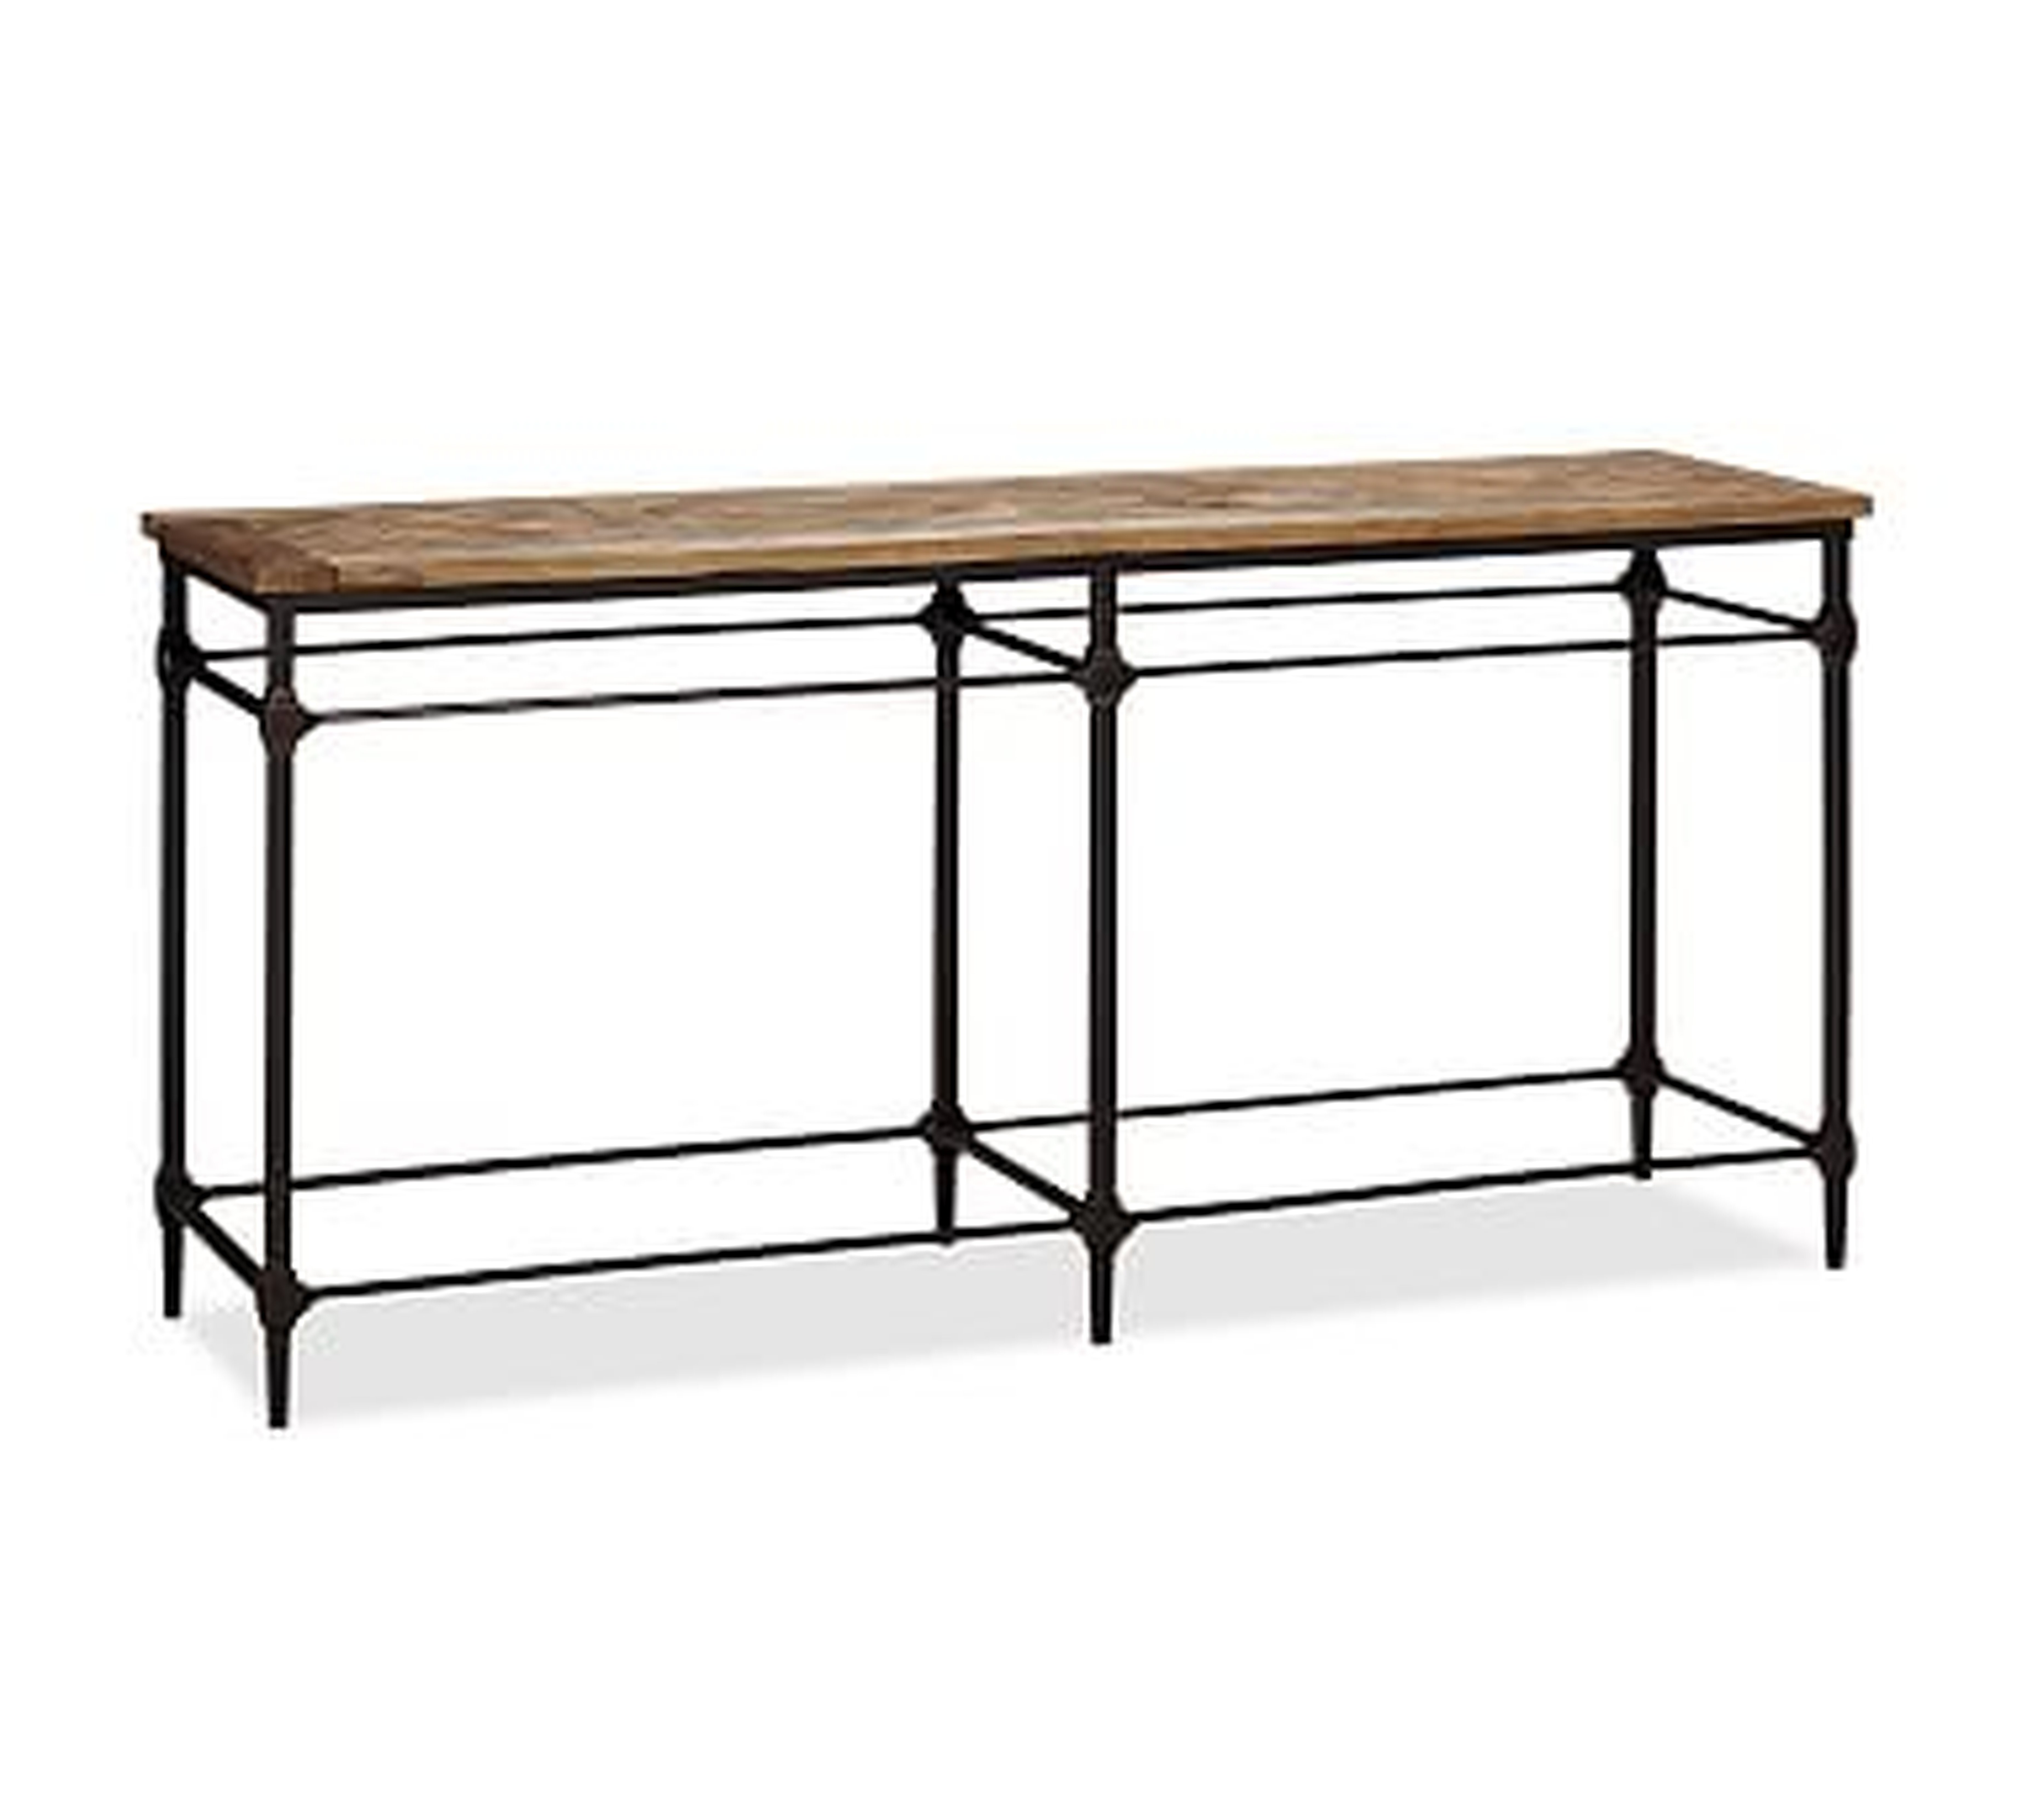 Parquet 71" Reclaimed Wood & Metal Console Table - Pottery Barn